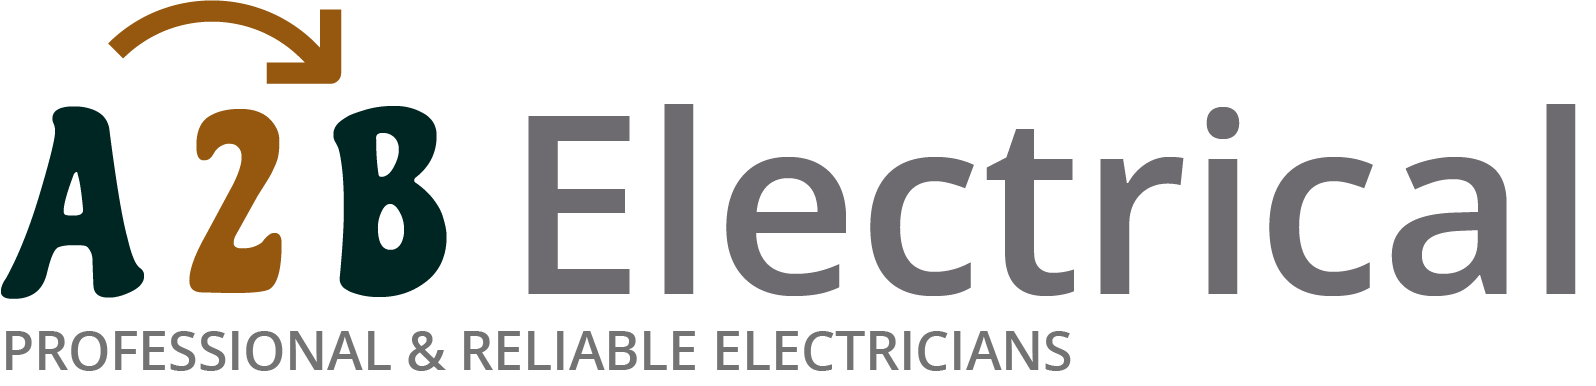 If you have electrical wiring problems in Headington, we can provide an electrician to have a look for you. 